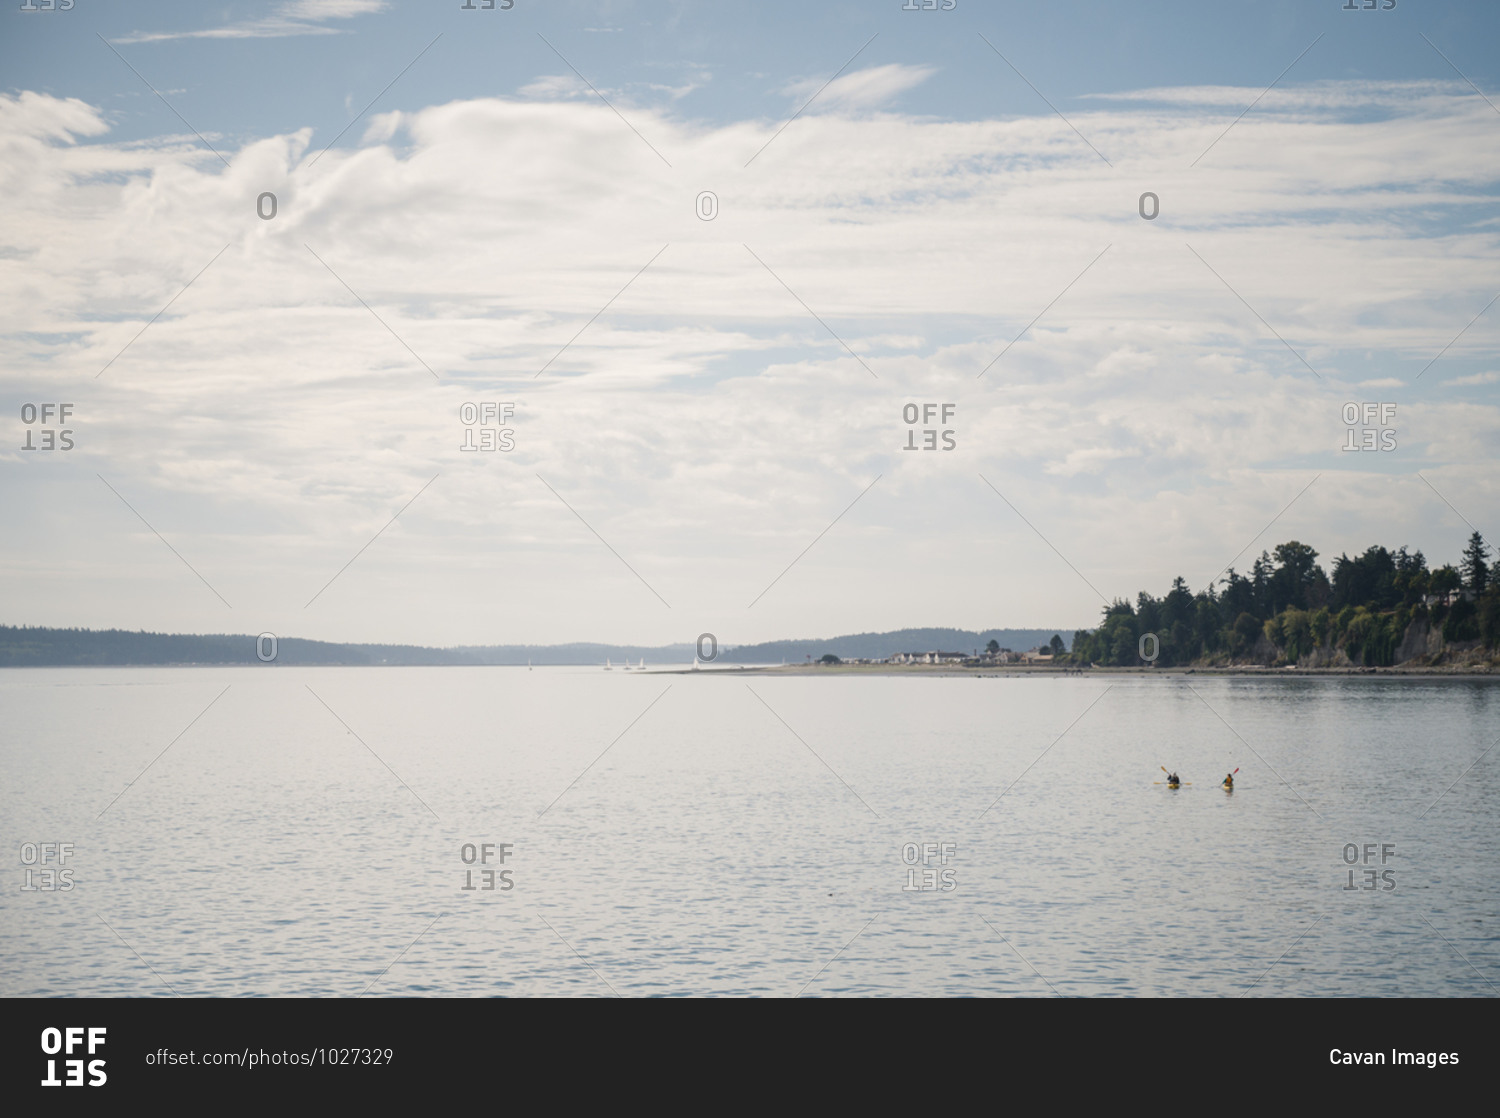 Two kayakers paddle across the water under a blue sky with white clouds near Port Townsend, WA